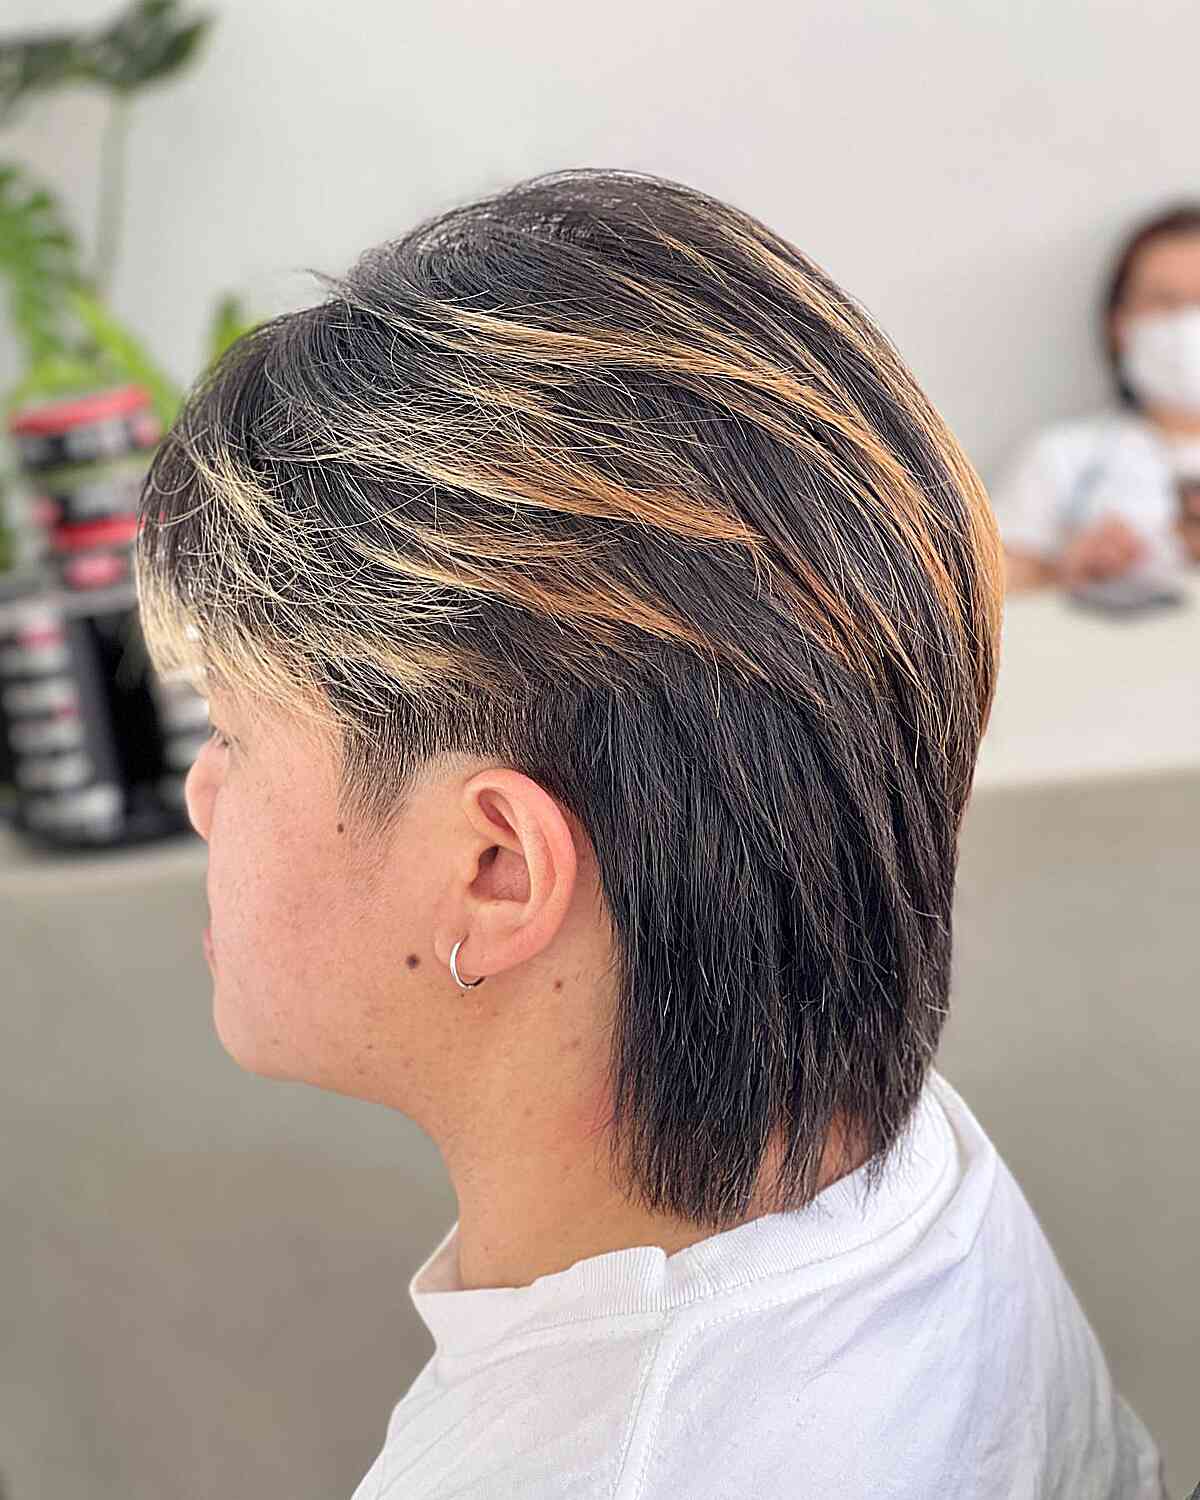 Kpop-Styled Straight Mullet with Blonde Accents For Men